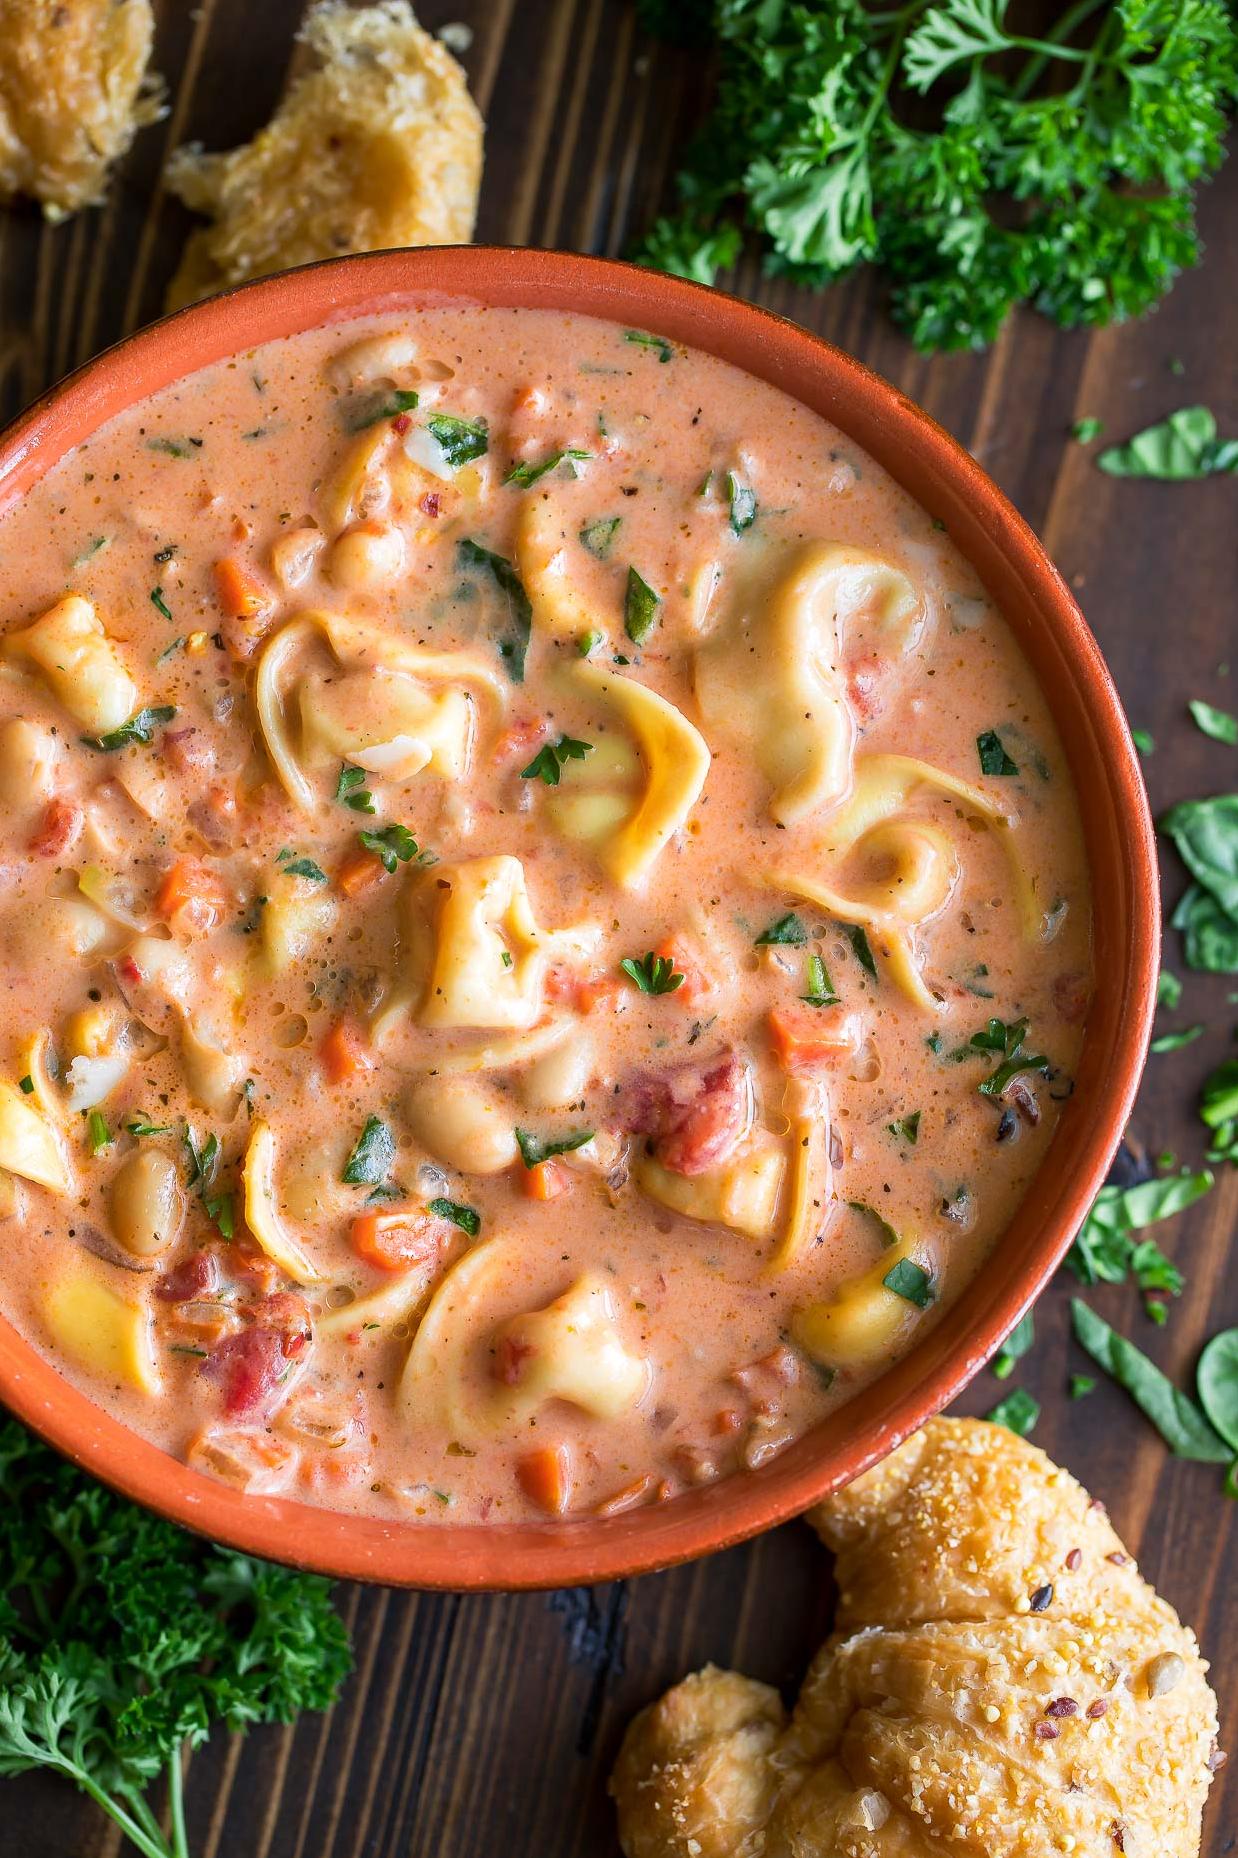  Dive into a bowl of comfort with this vegetarian tortellini soup!